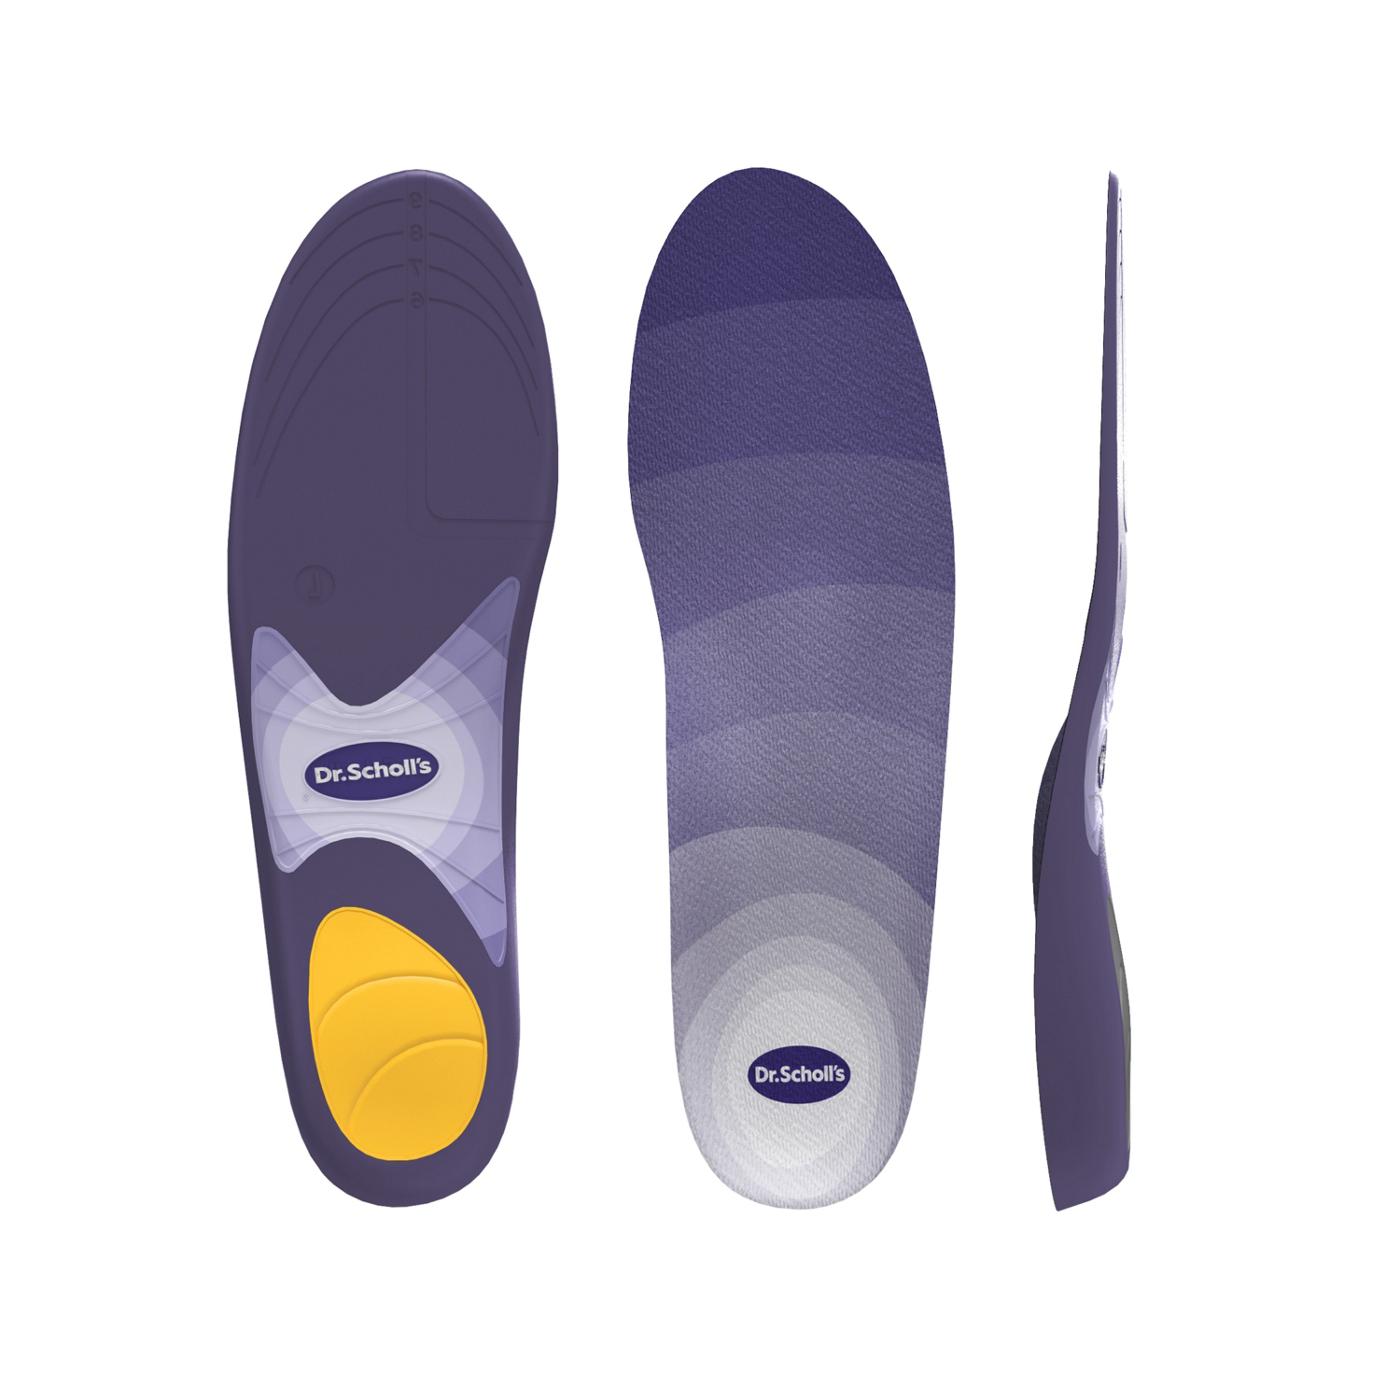 Dr. Scholl's Prevent Pain Protective Insoles, Trim to Fit Insert, Women Shoe Size 8-14; image 6 of 10